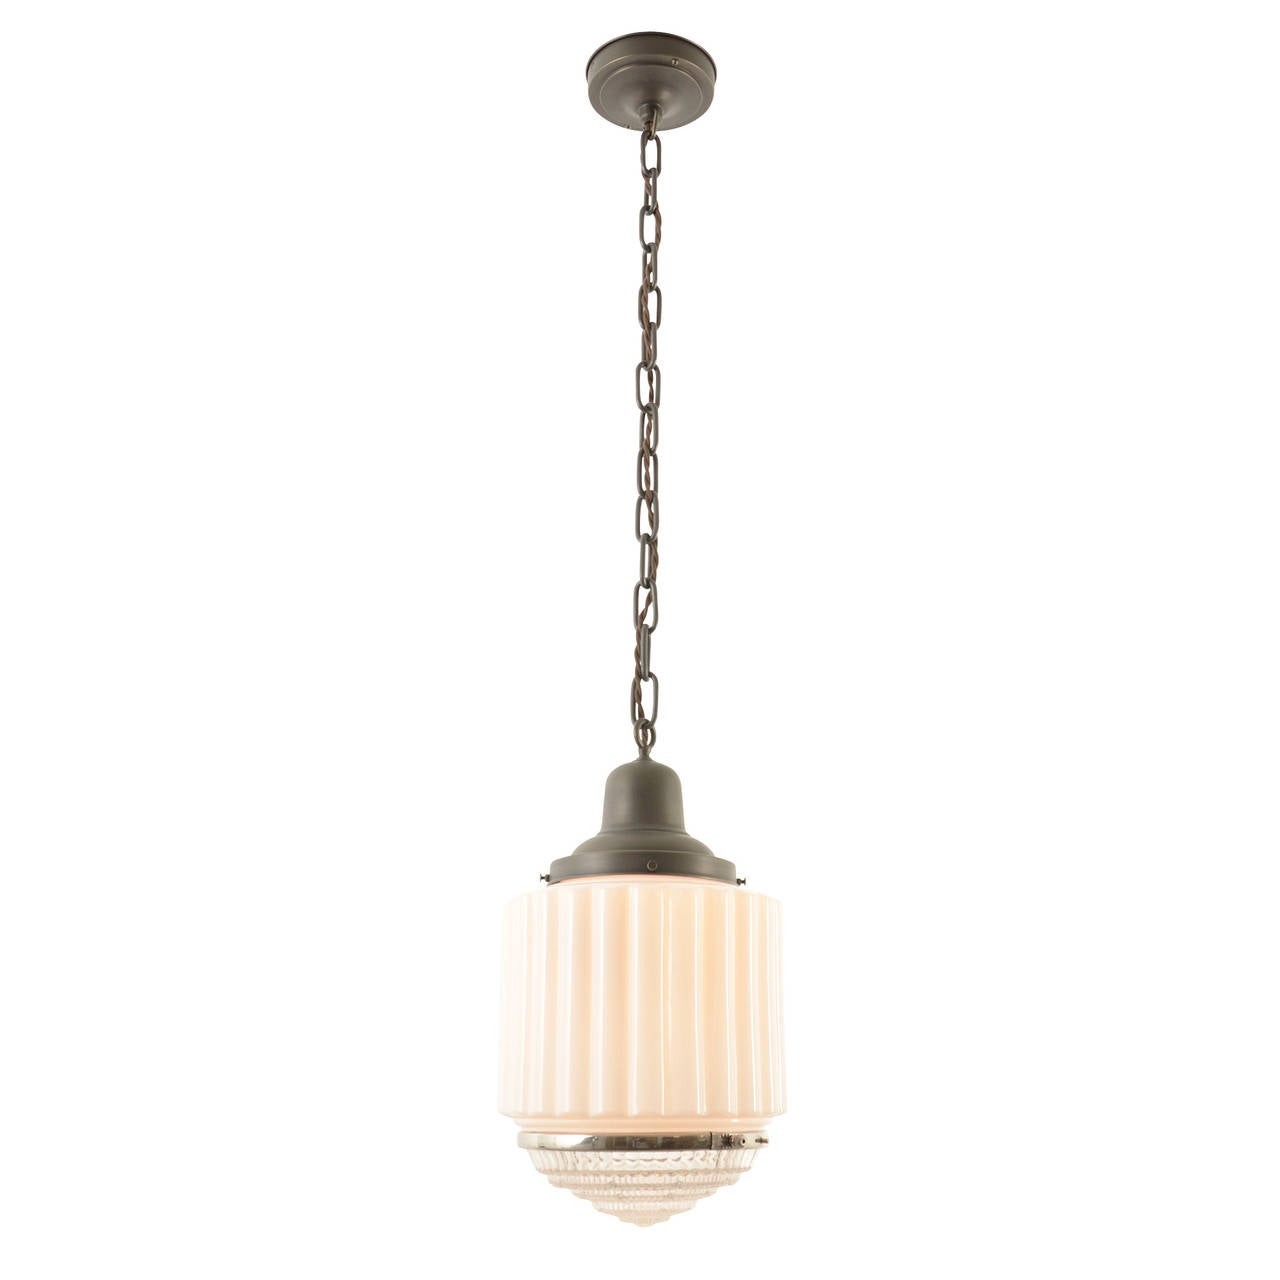 This classic Late Deco pendant features the popular combination white and clear shade common in many Depression-era stores and commercial settings. The clear pressed-glass lens on the bottom of the shade directed more direct rays downward while the